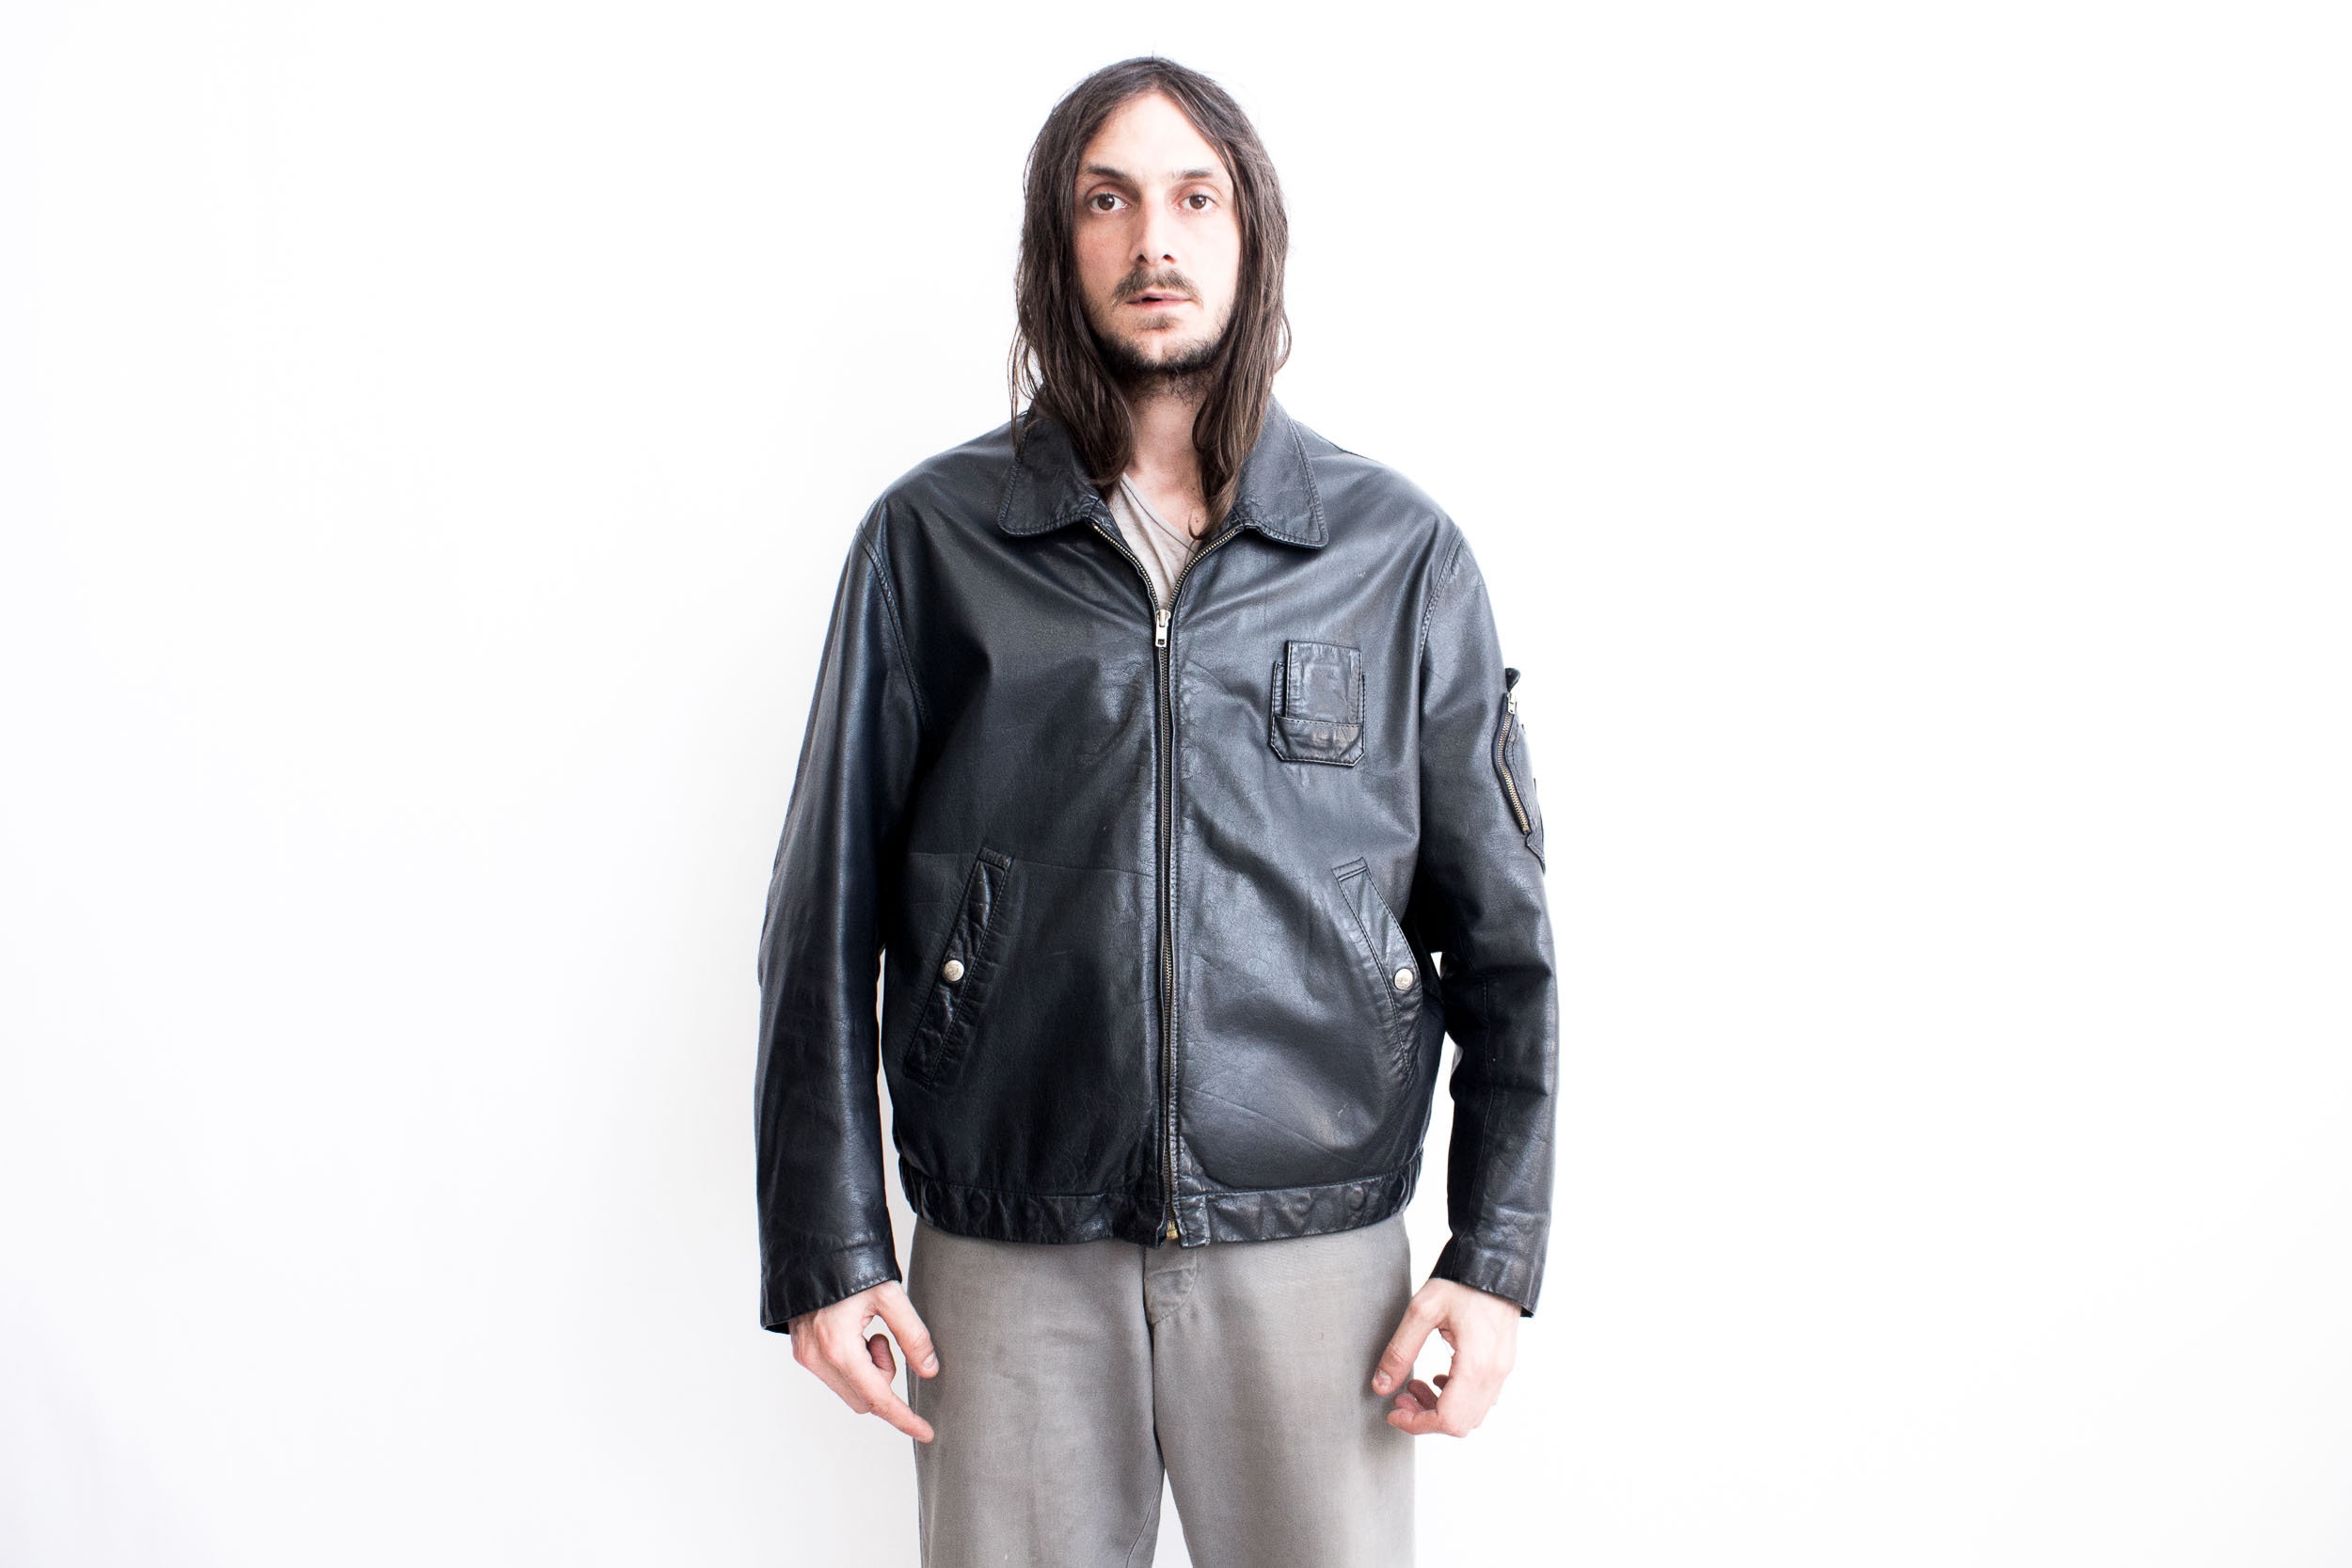 French PILOT Jacket 1980s . Flight Jacet Air Force Leather Bomber 